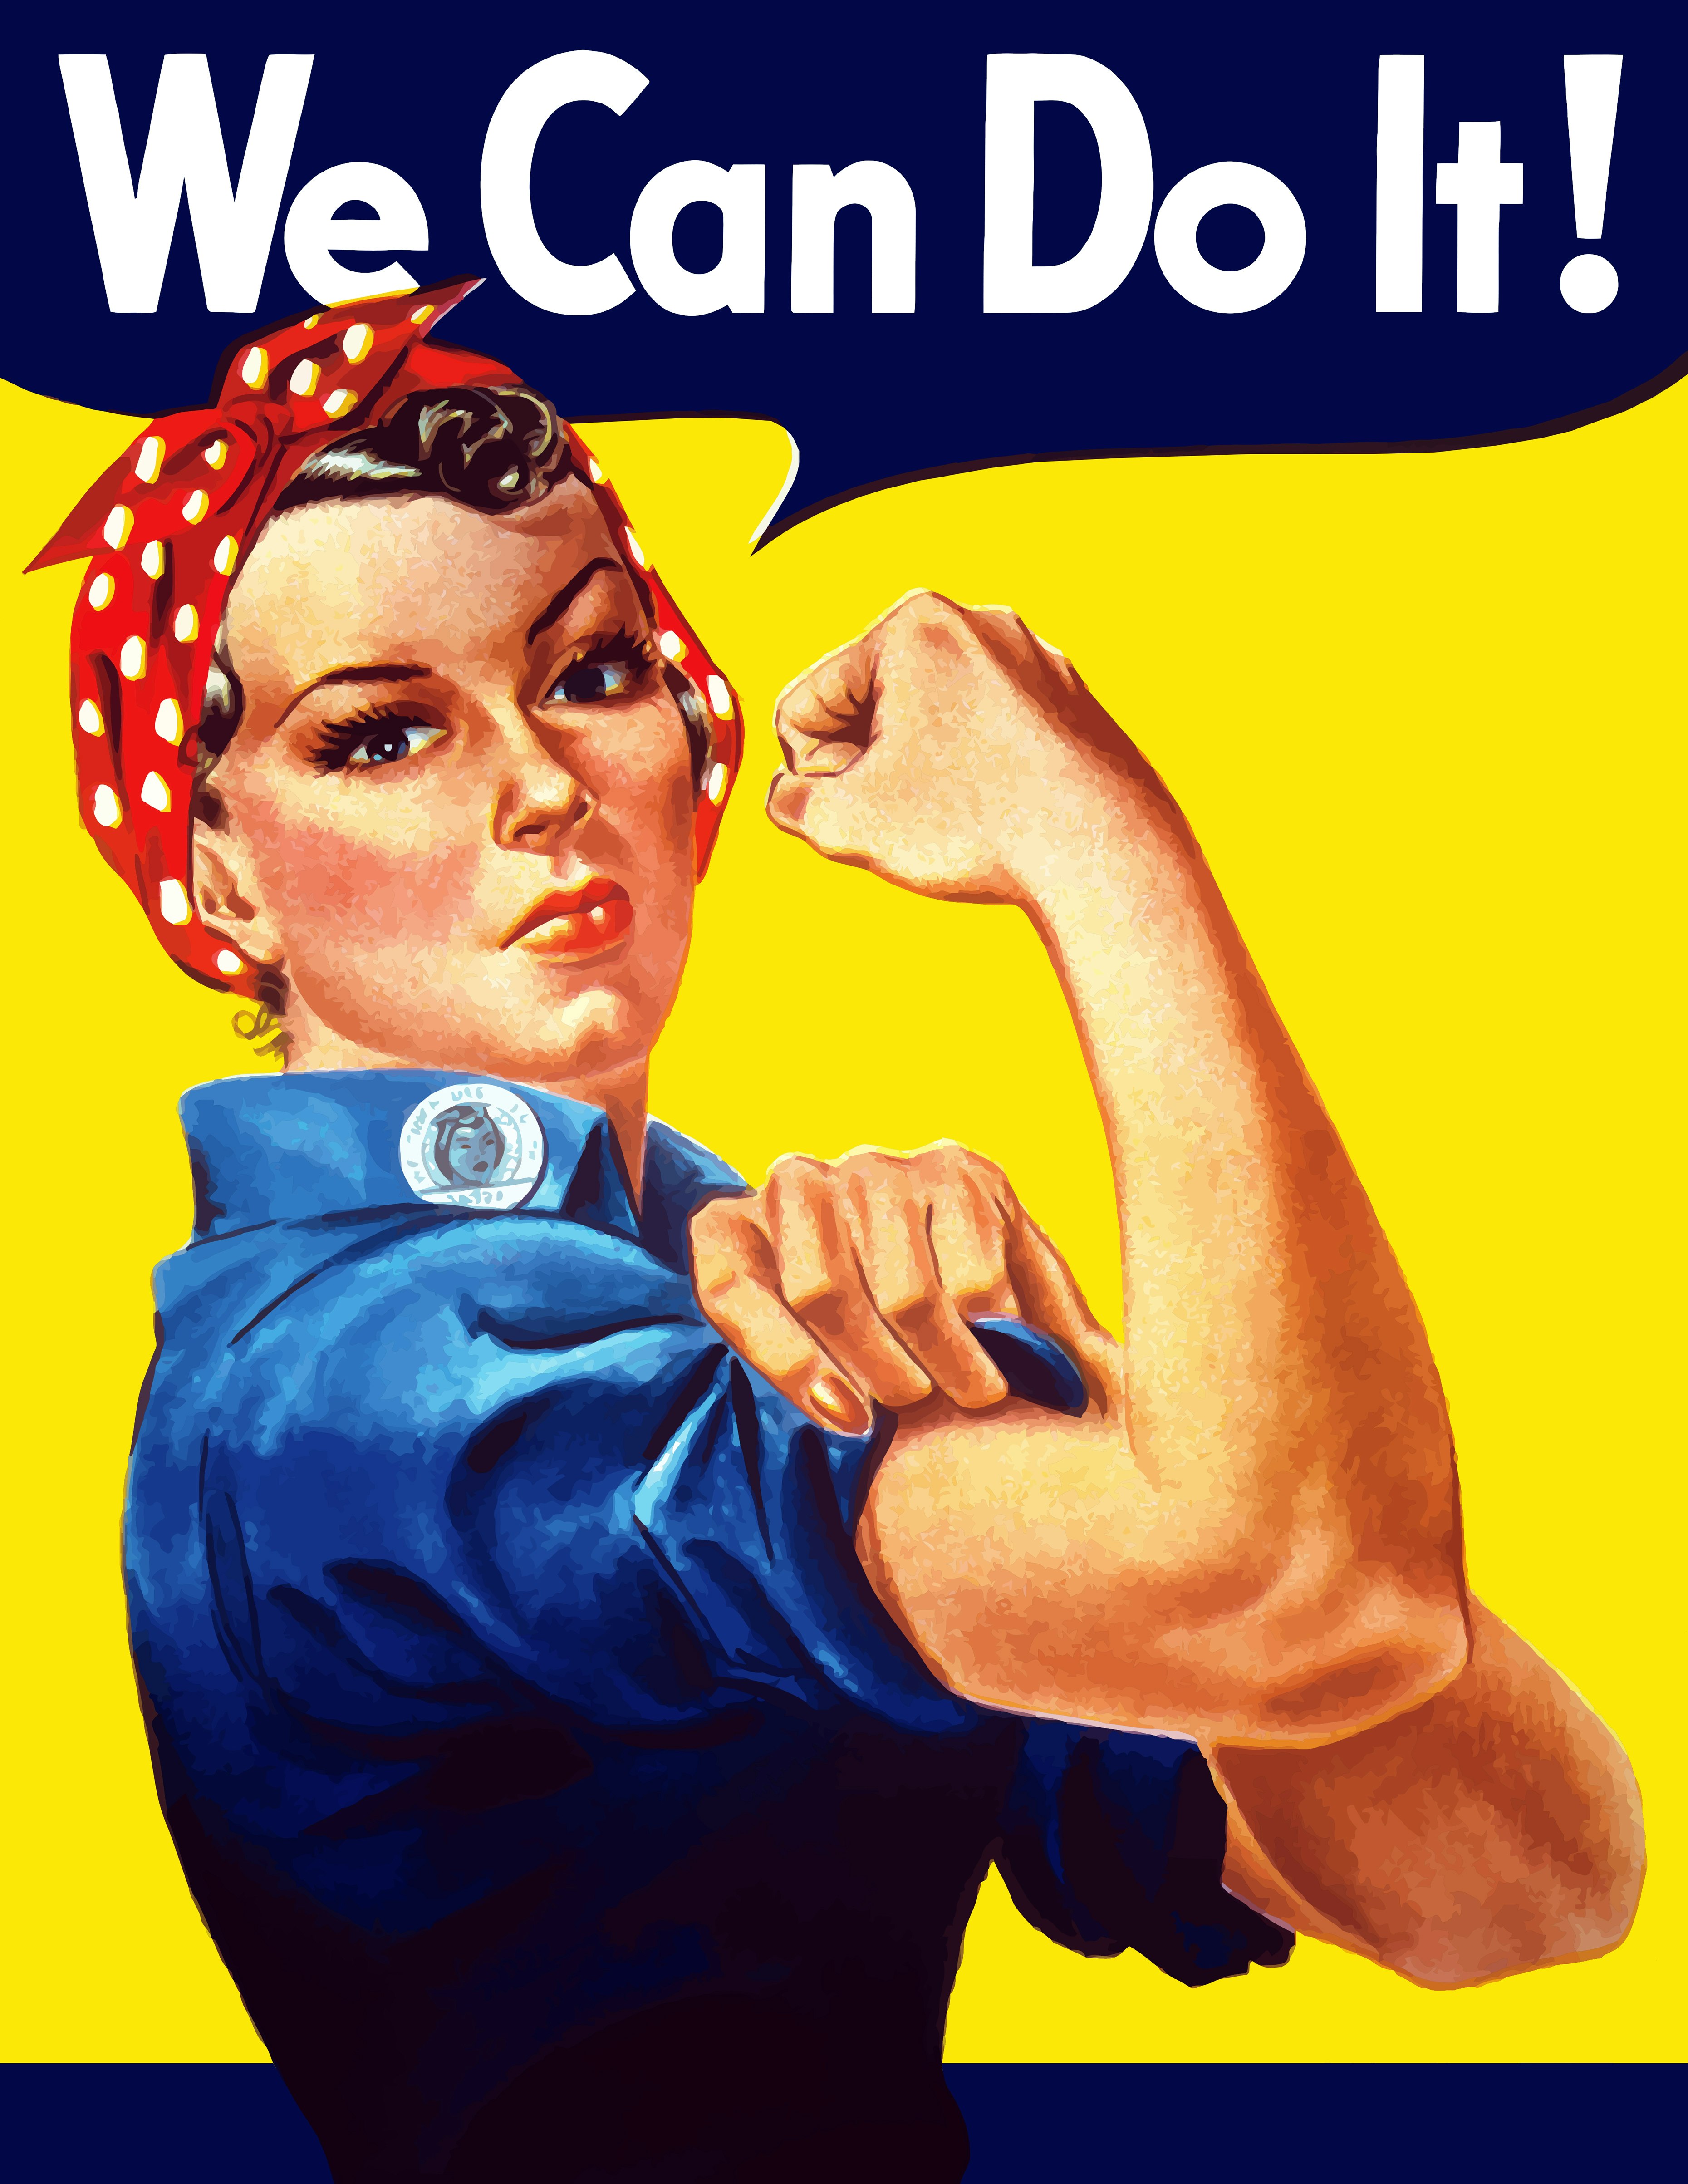 A poster featuring Rosie the Riveter, saying "We can do it!"